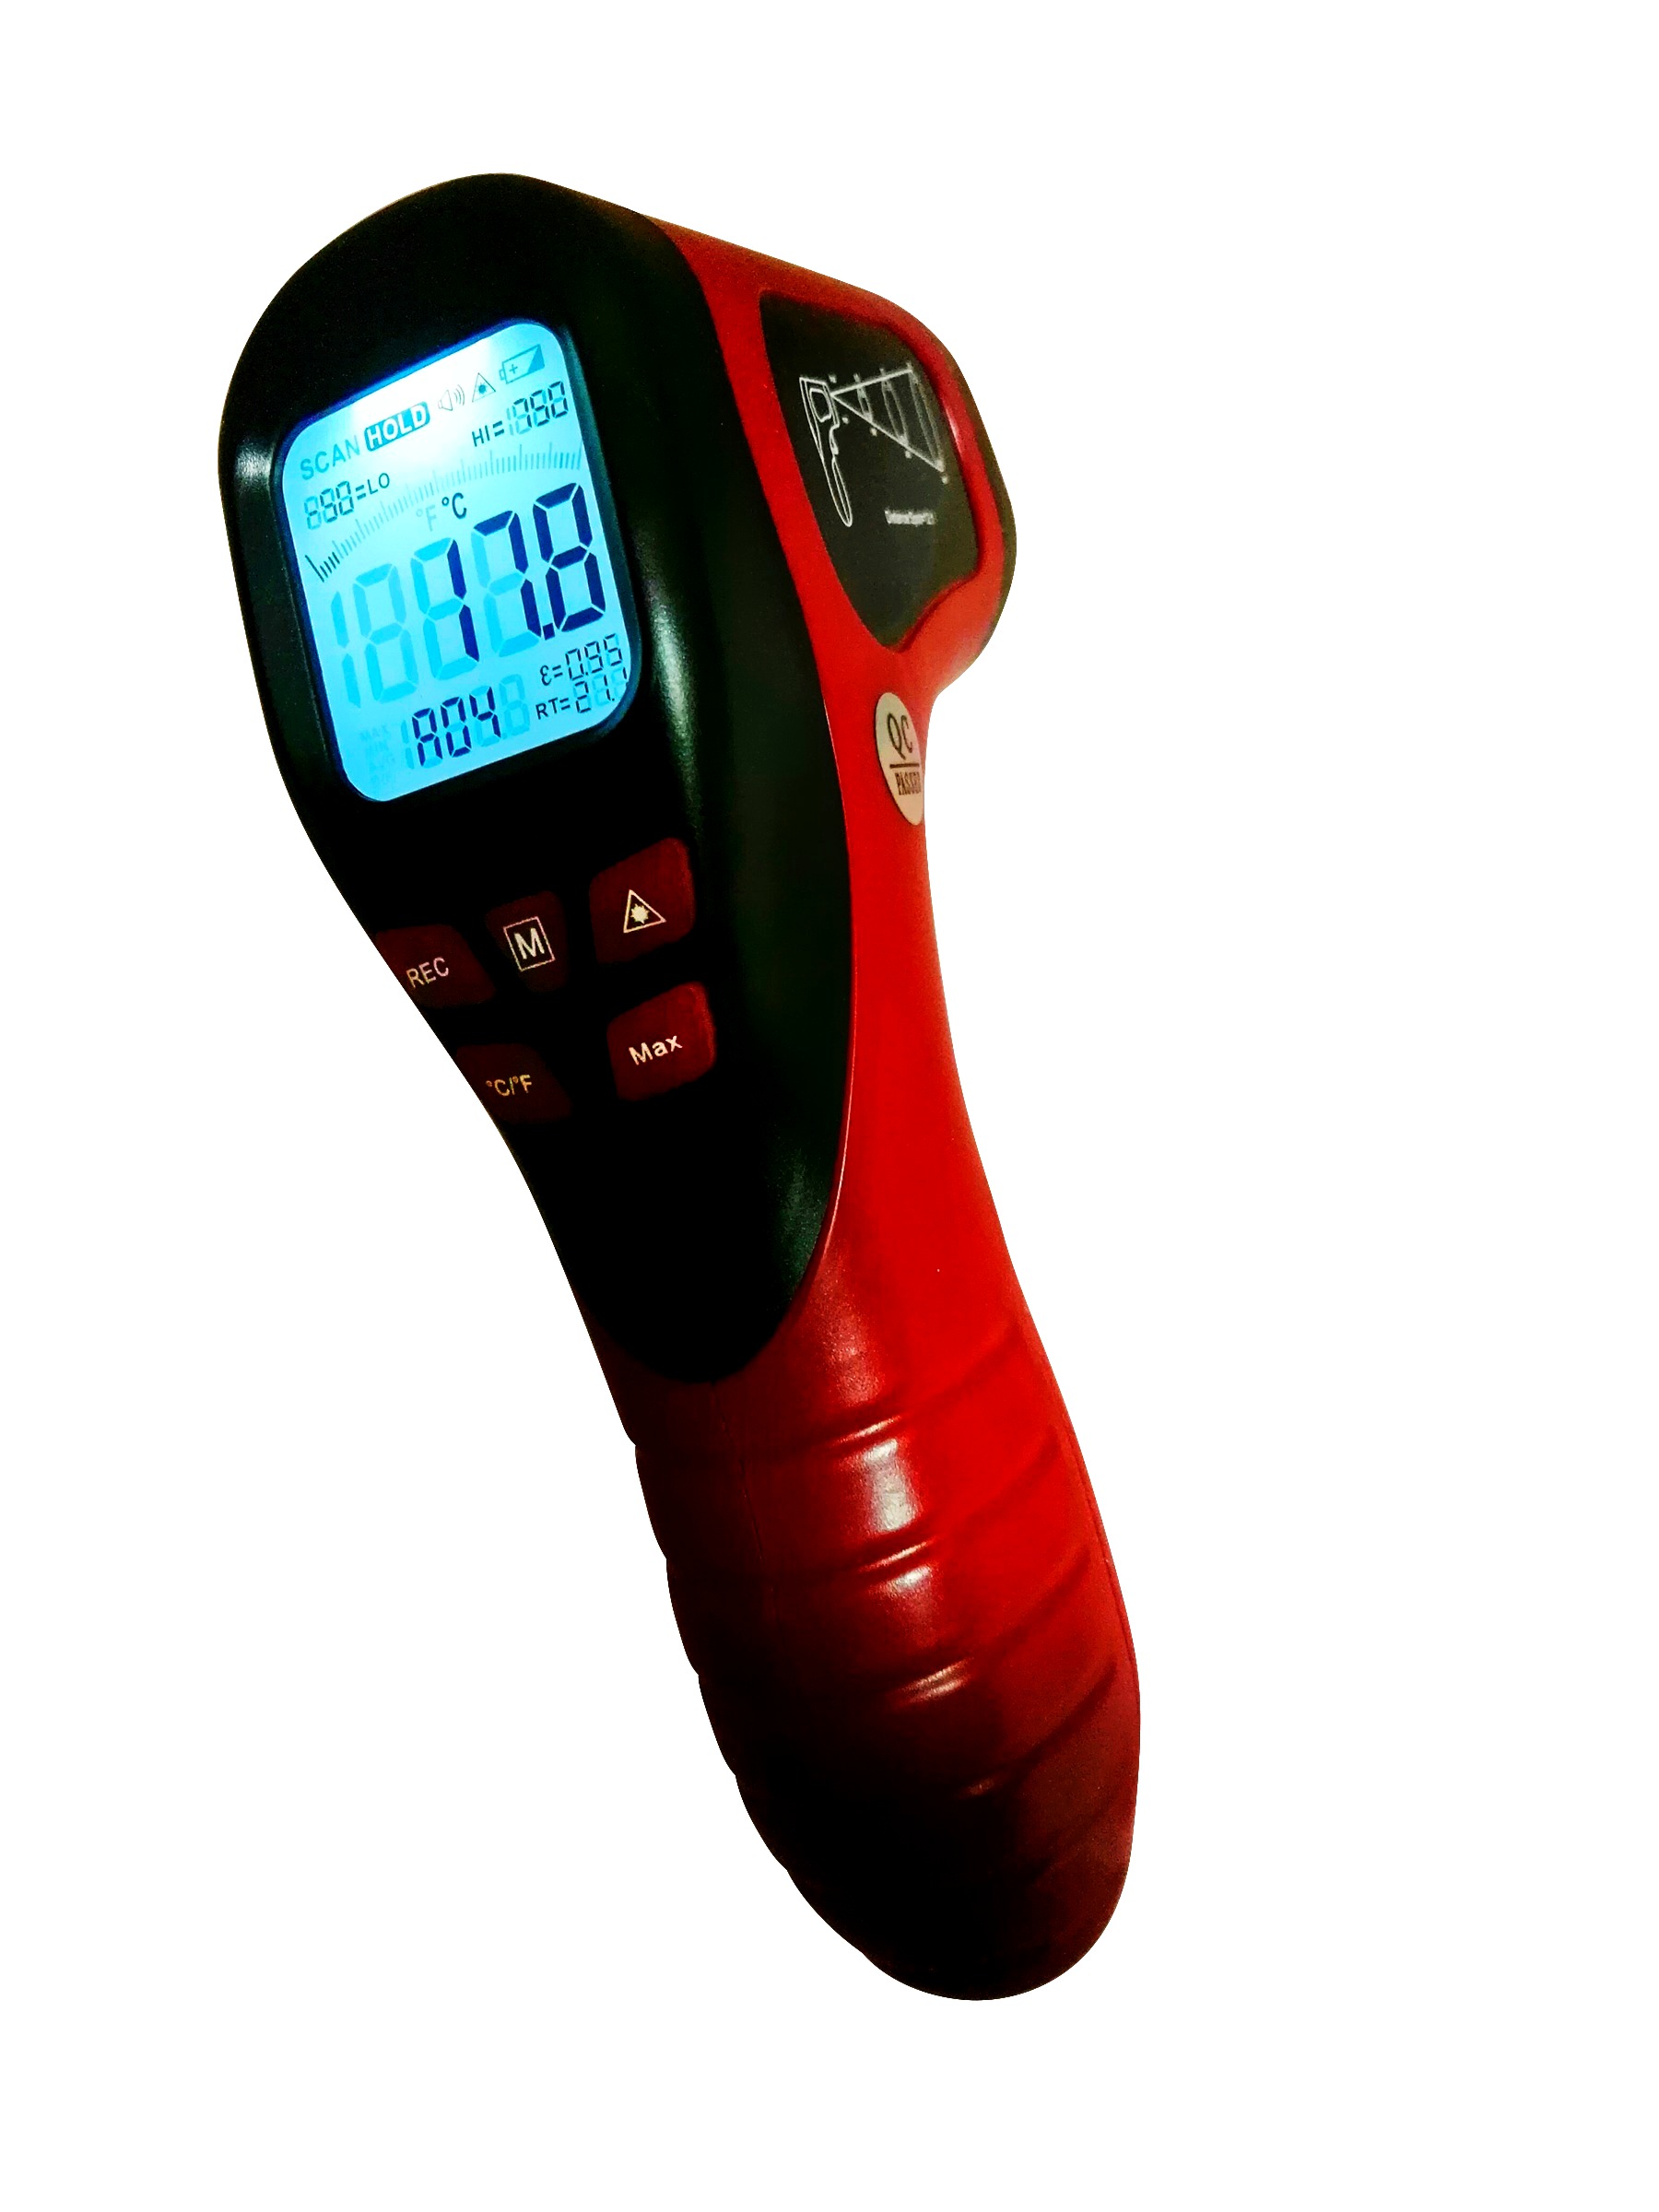 https://www.instrumentdevices.com.au/wp-content/uploads/2017/09/Infrared-Thermometer-1-1.jpg